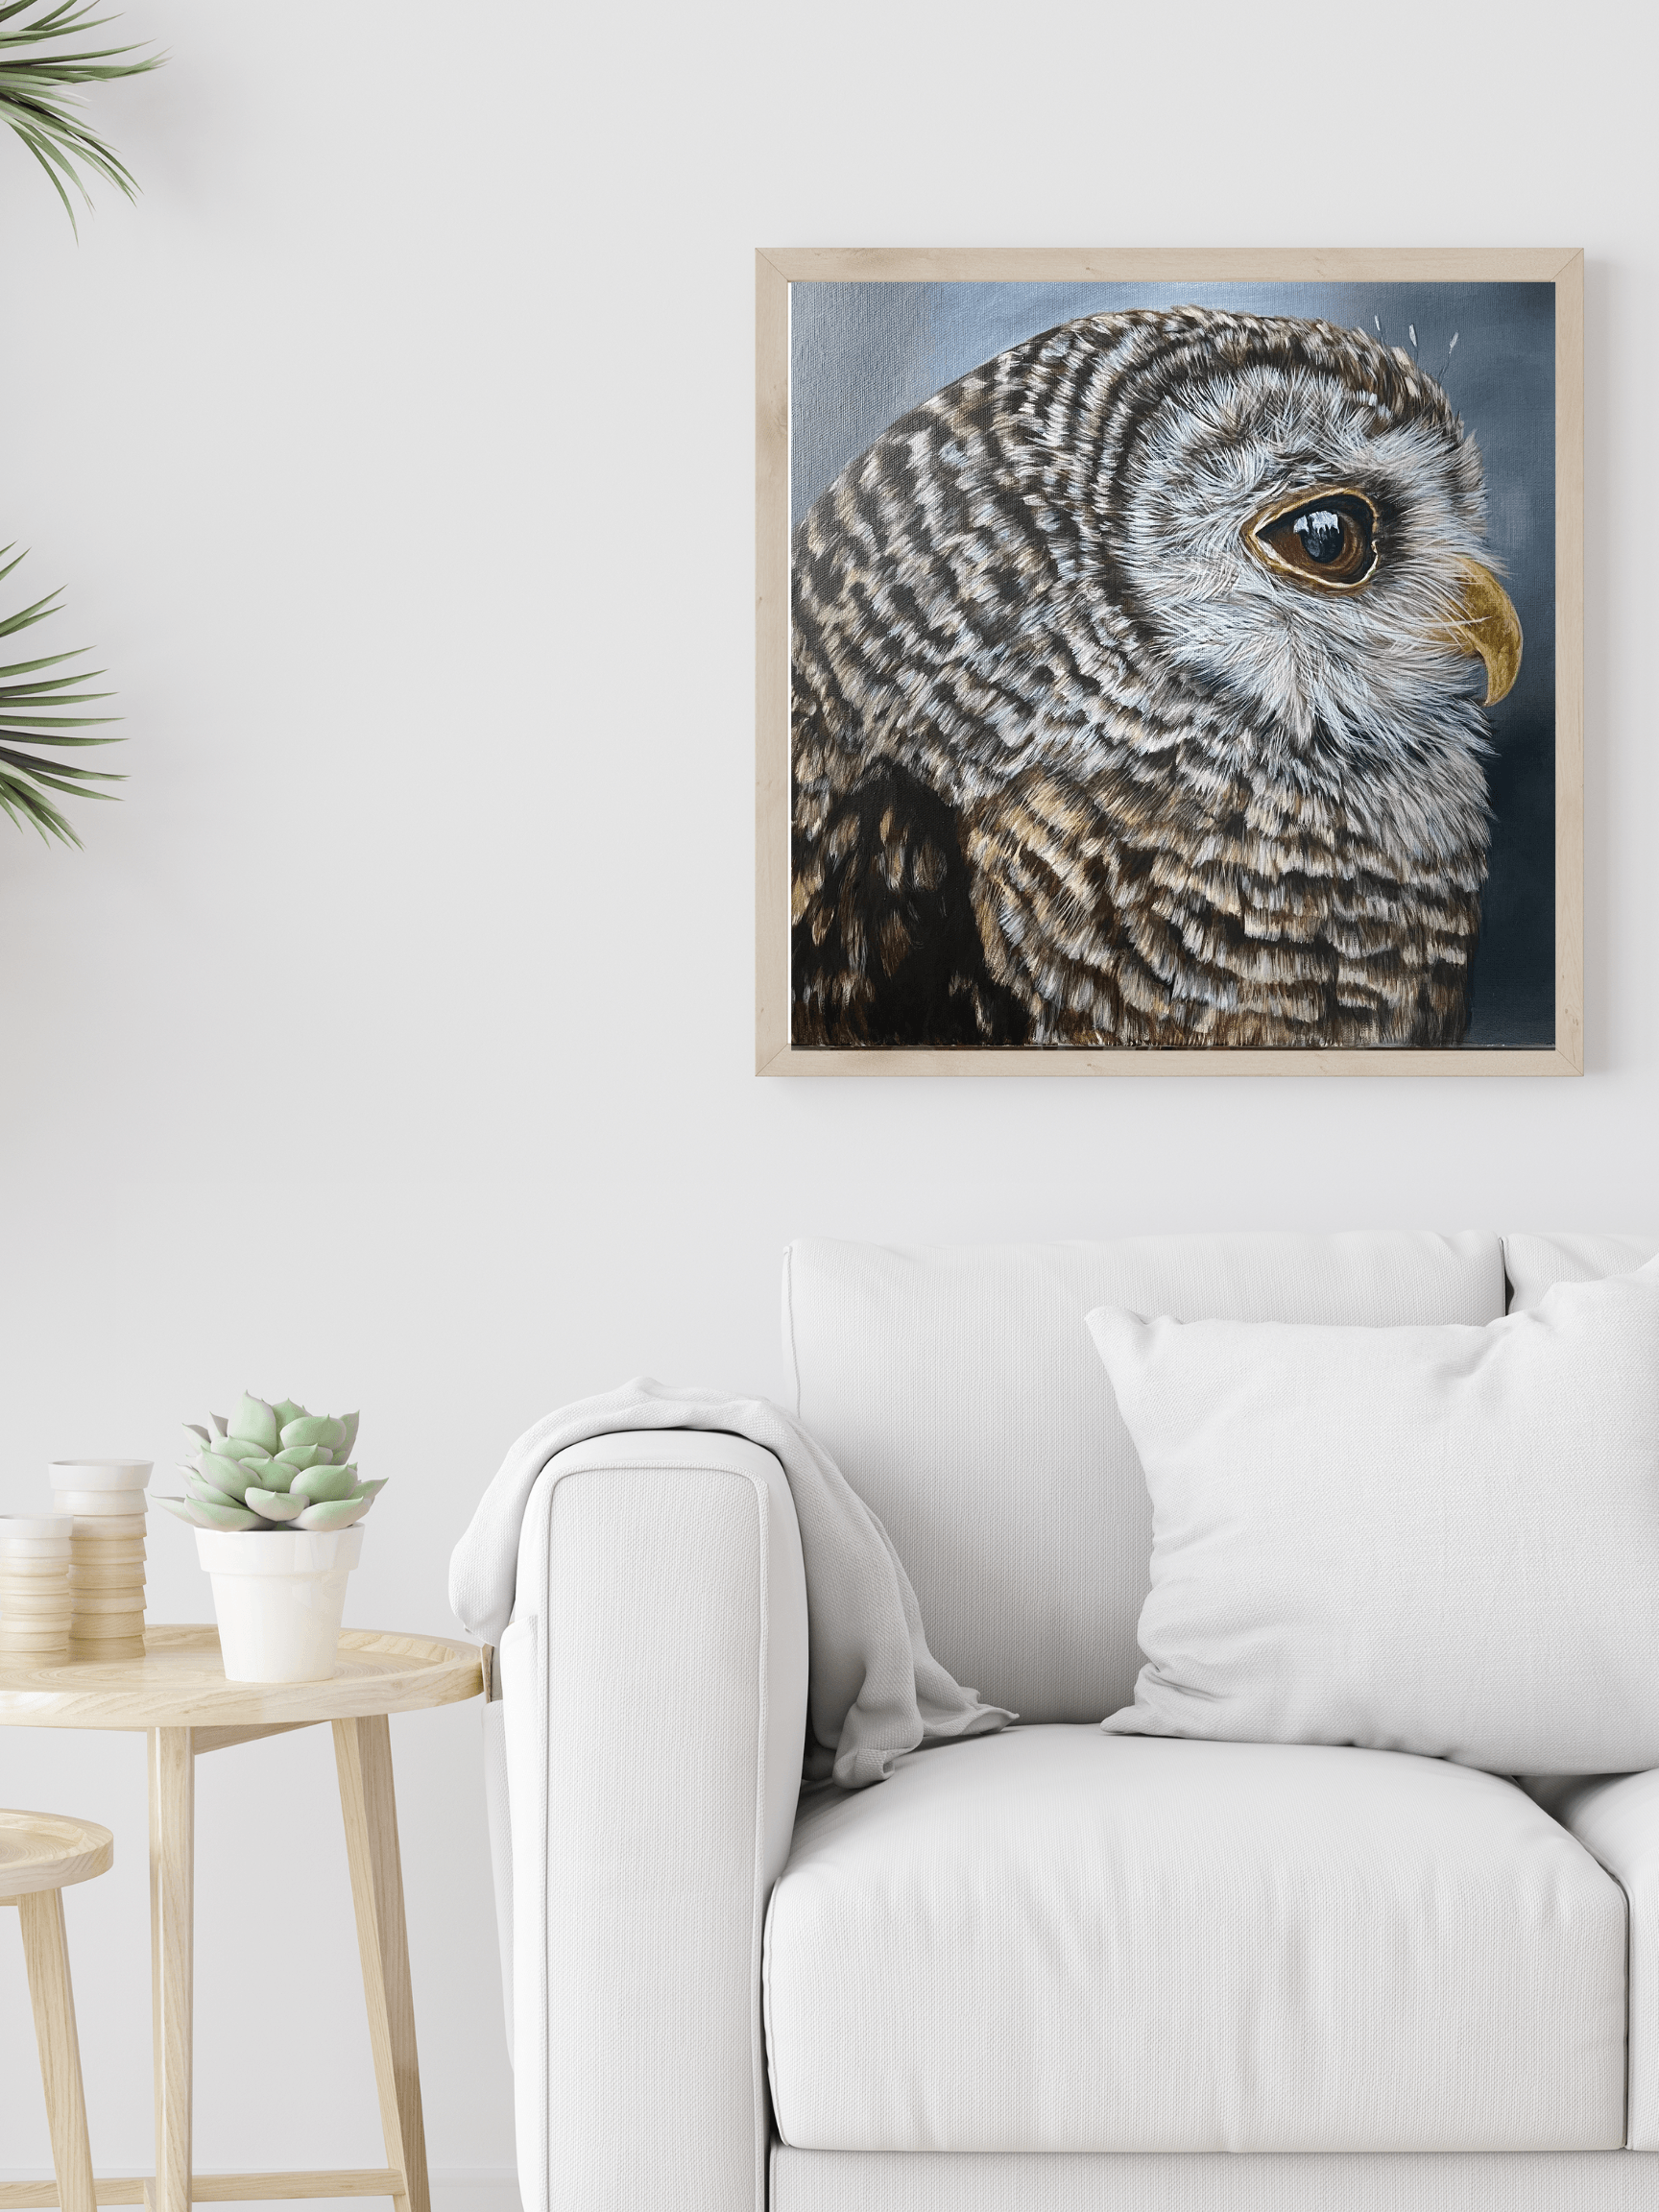 Owl portrait - Essence of the art by Yui & Bow